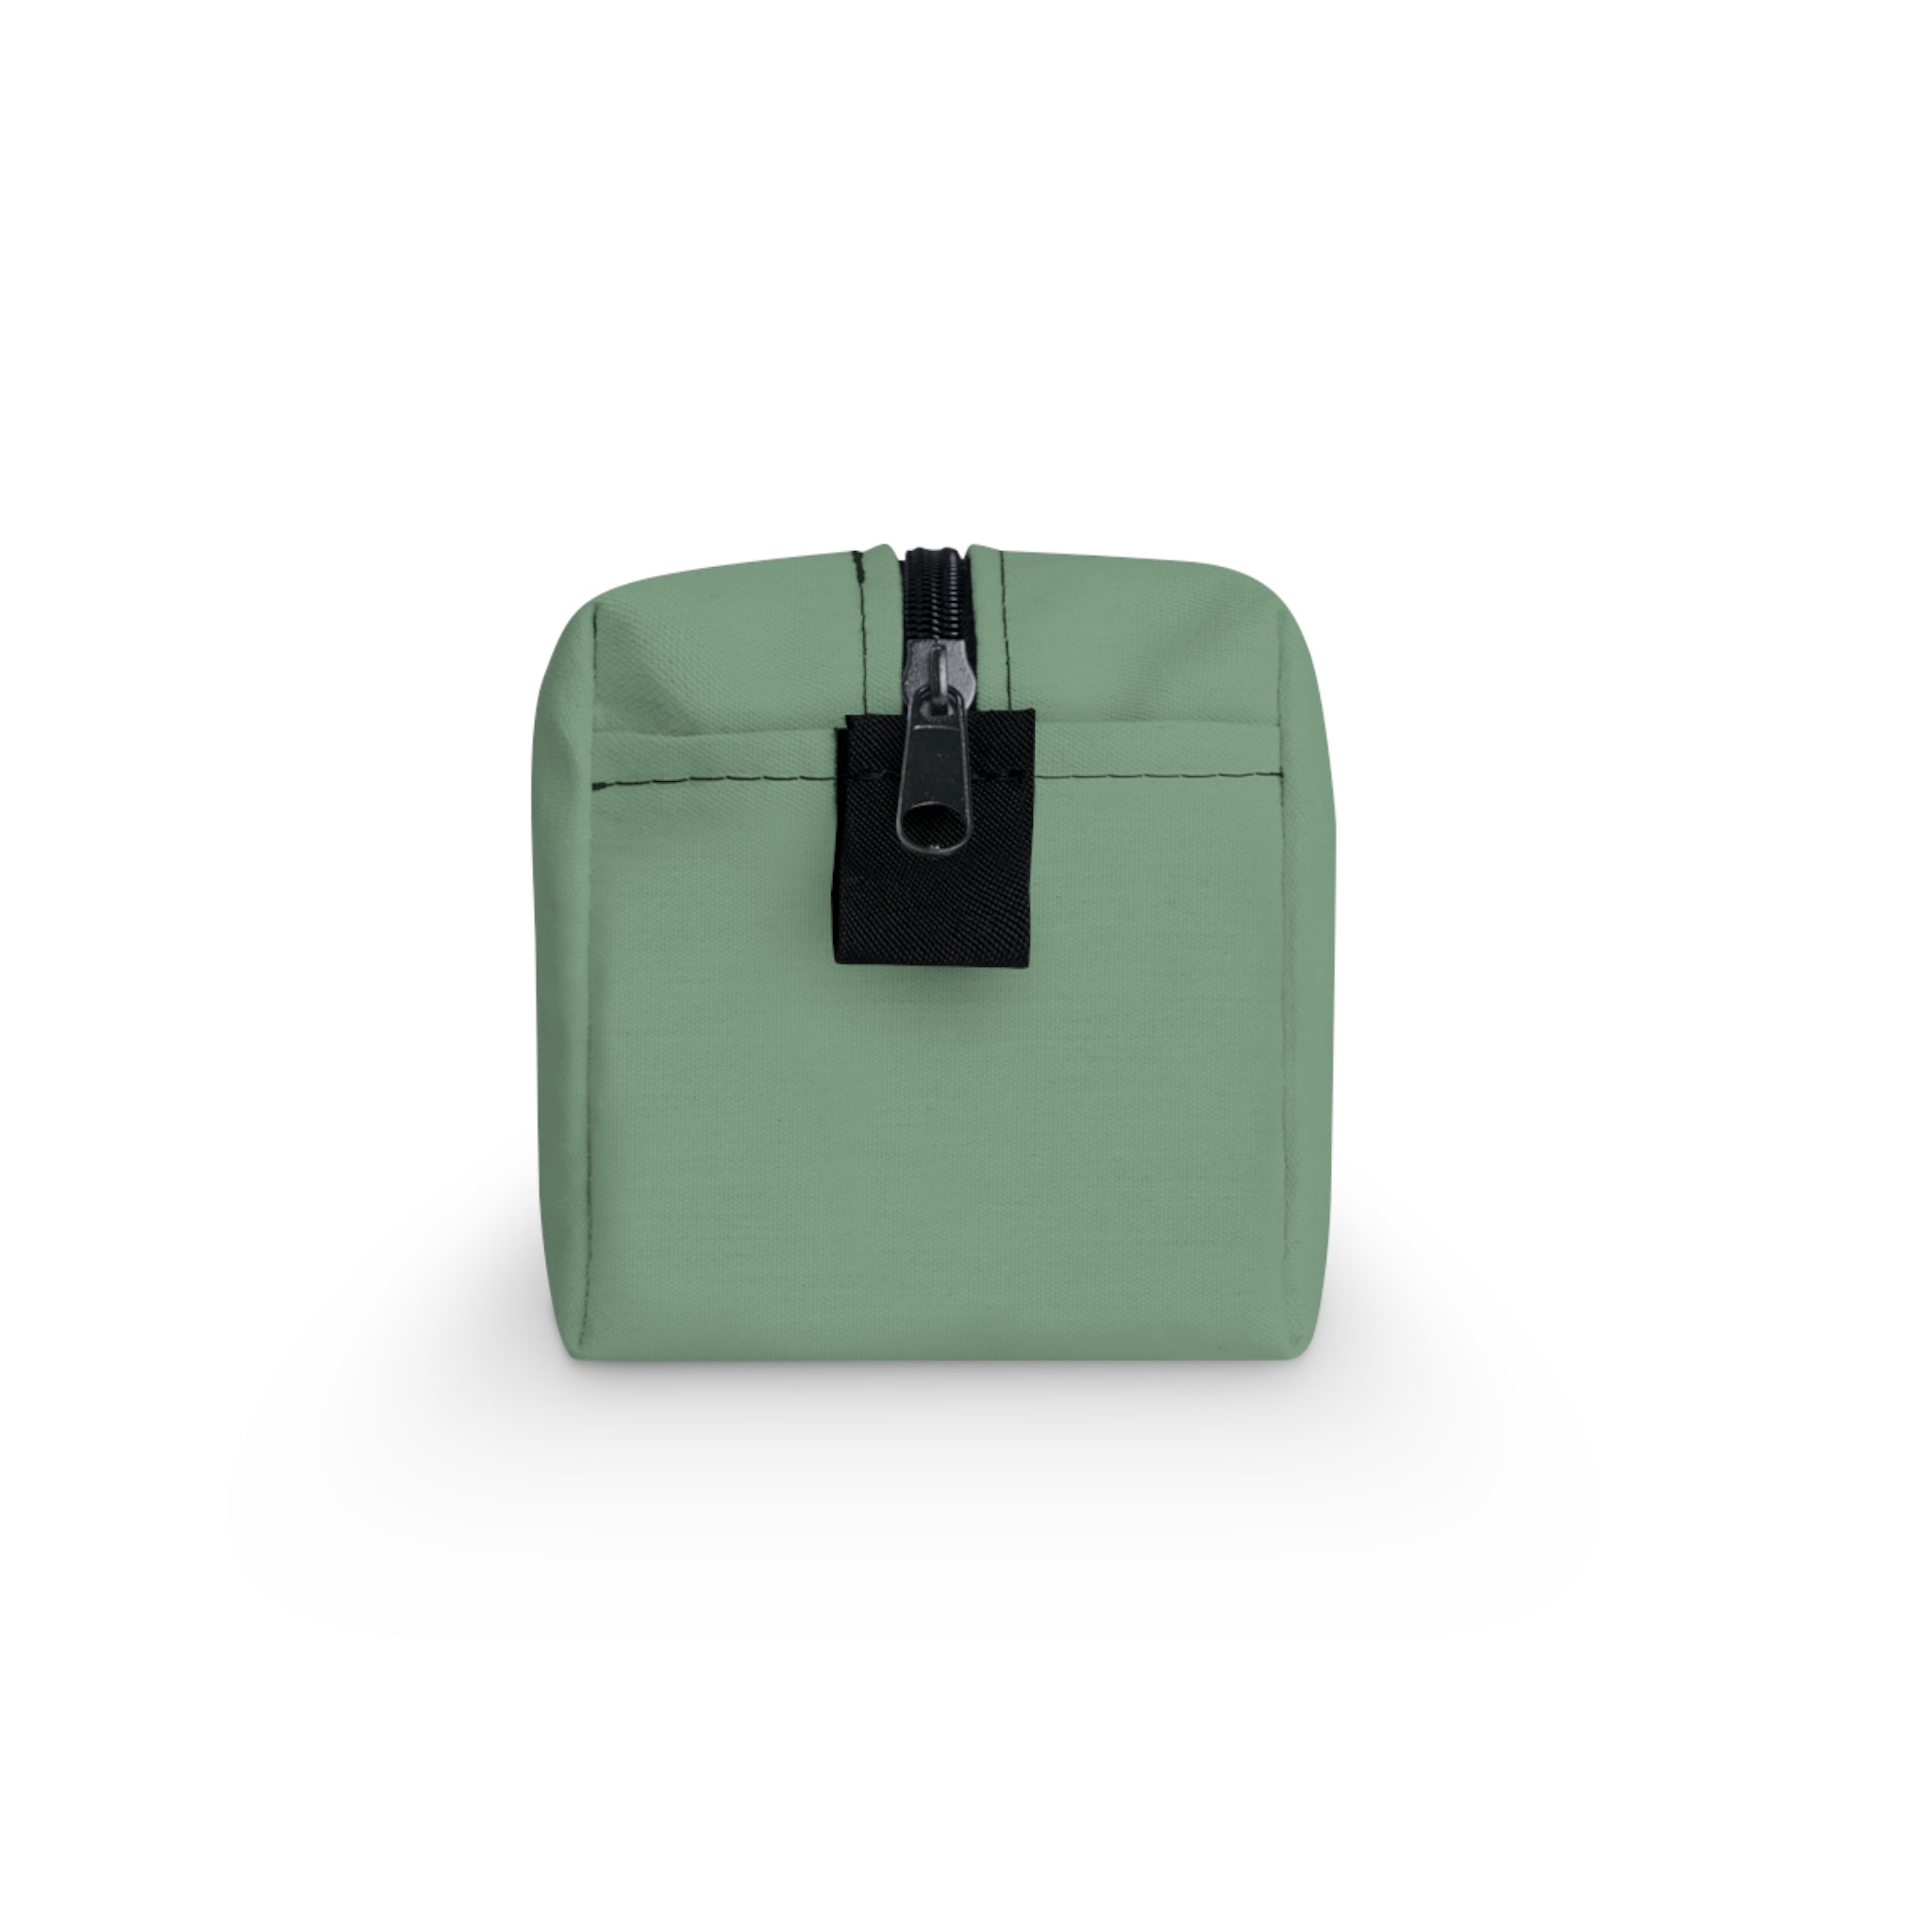 Mr. Toiletry Pouch (Green)